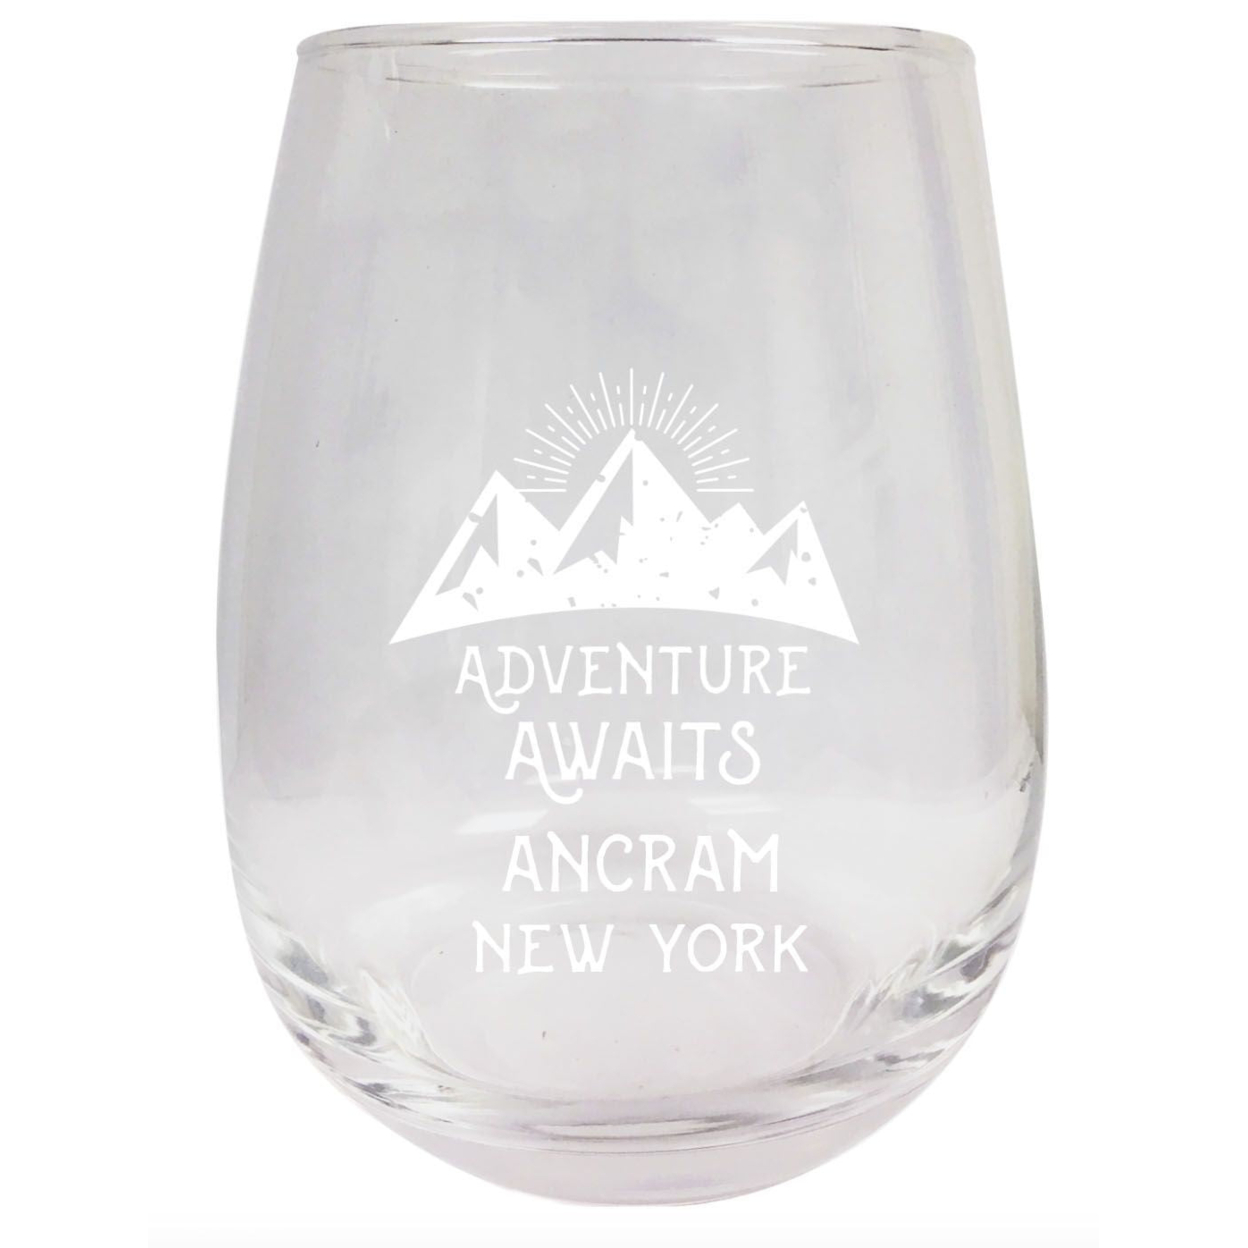 New York Engraved Stemless Wine Glass Duo